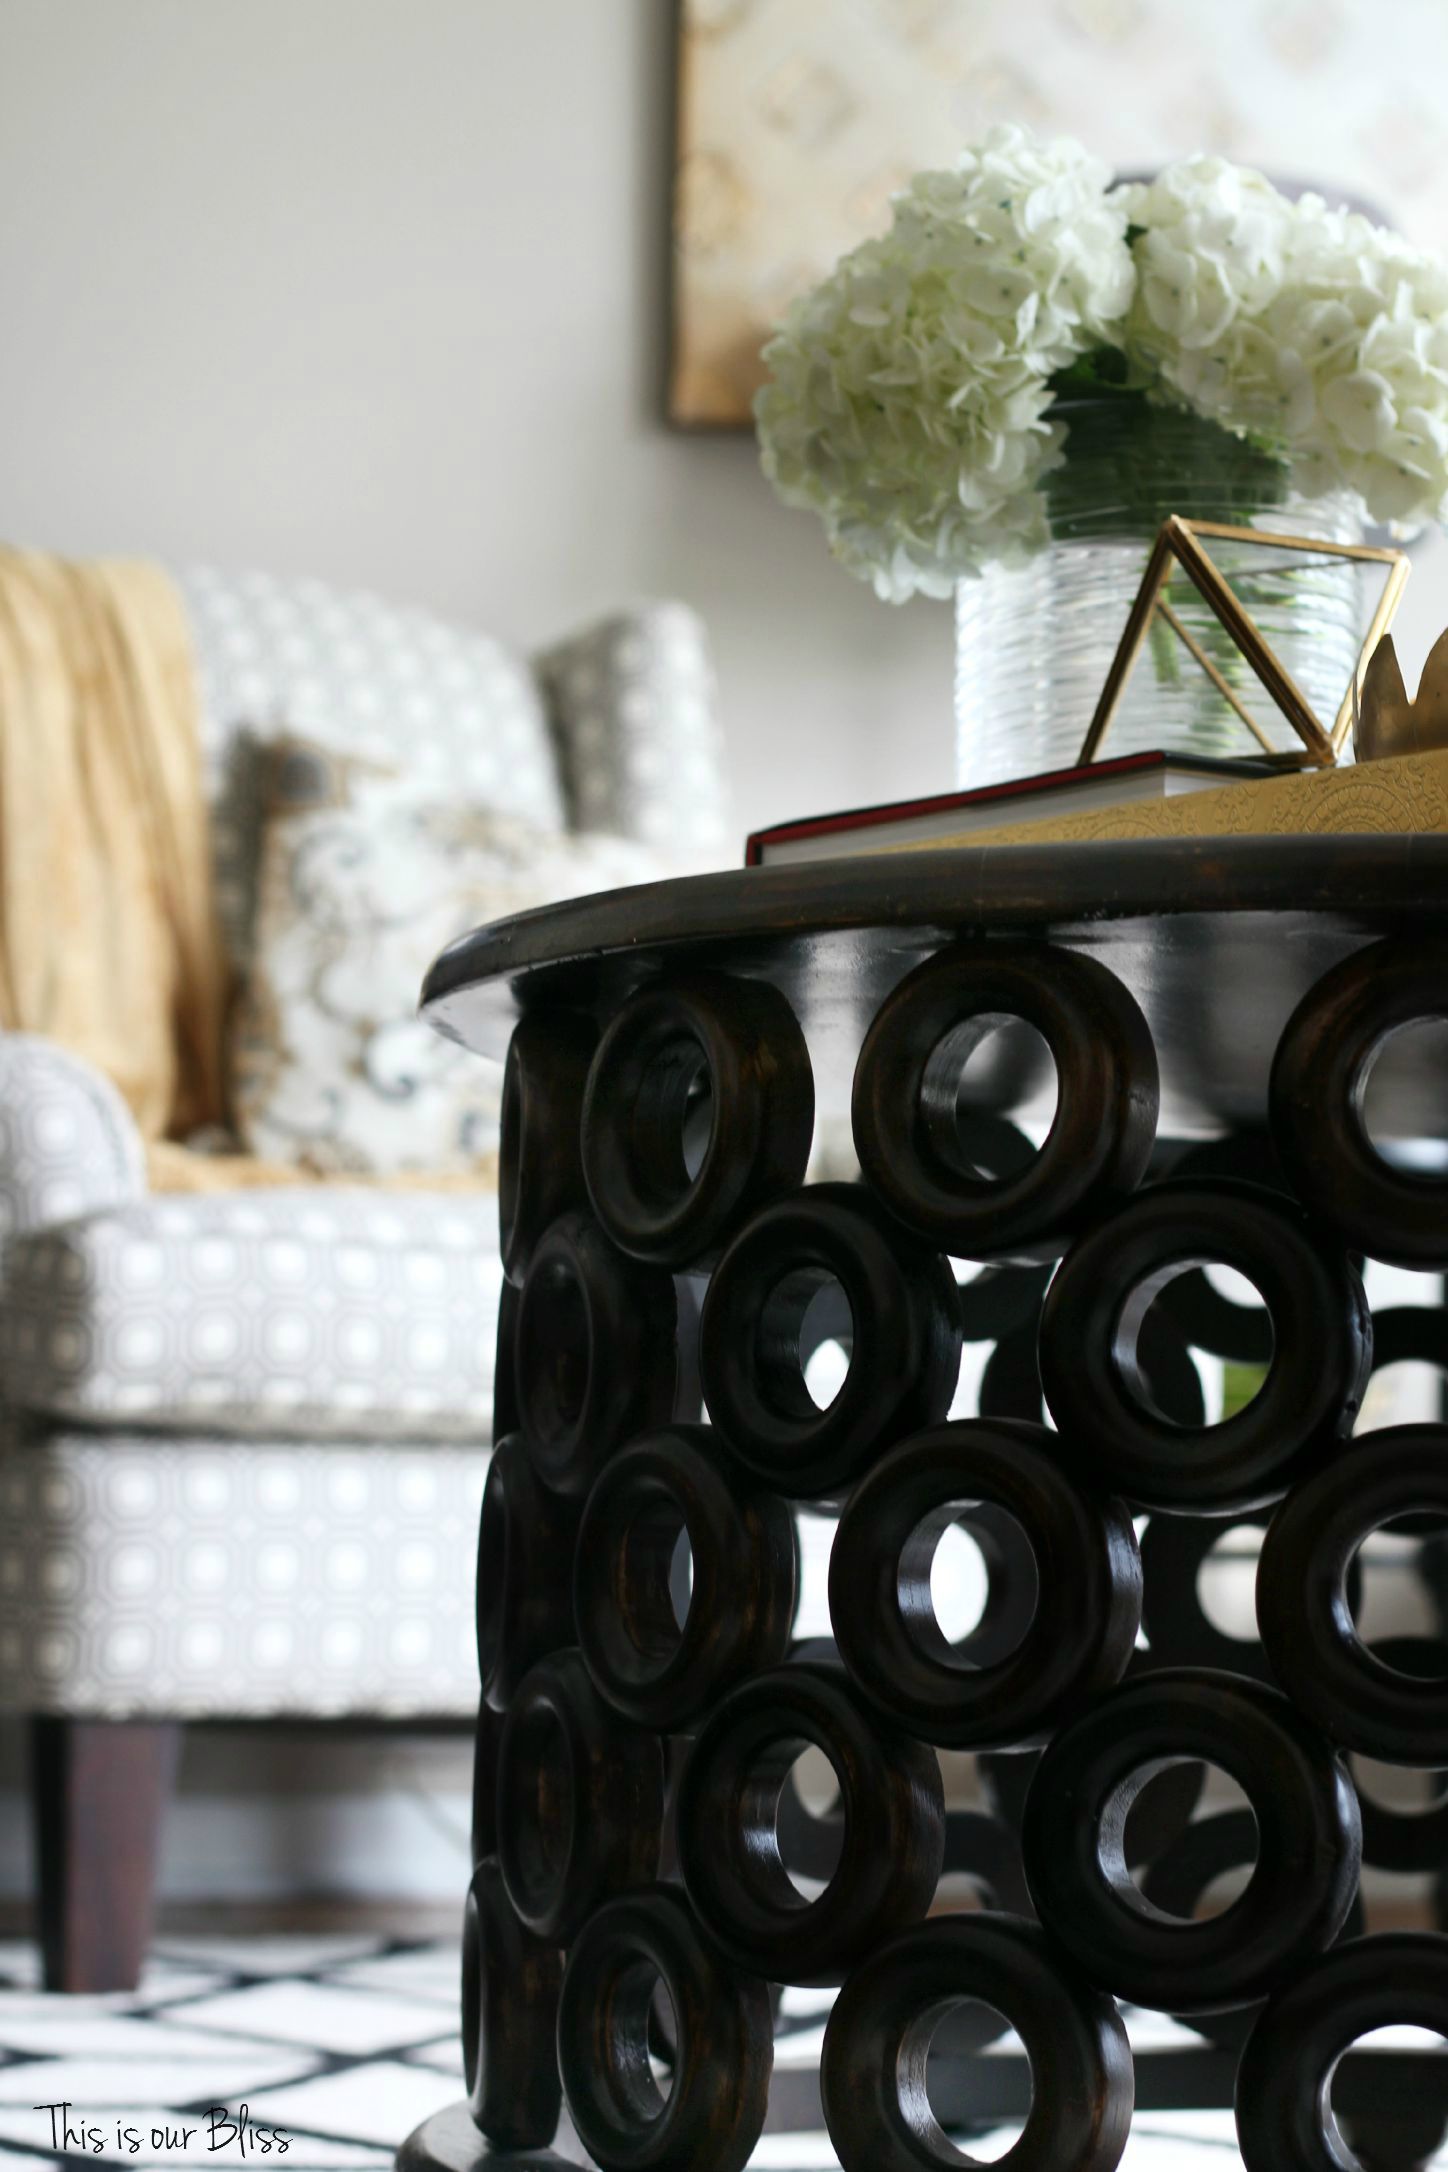 How to style a coffee table - coffee table styling - elements of a well-styled coffee table - coffee table detail - living room chairs - fresh flowers - 1 - Back to Basics - This is our Bliss